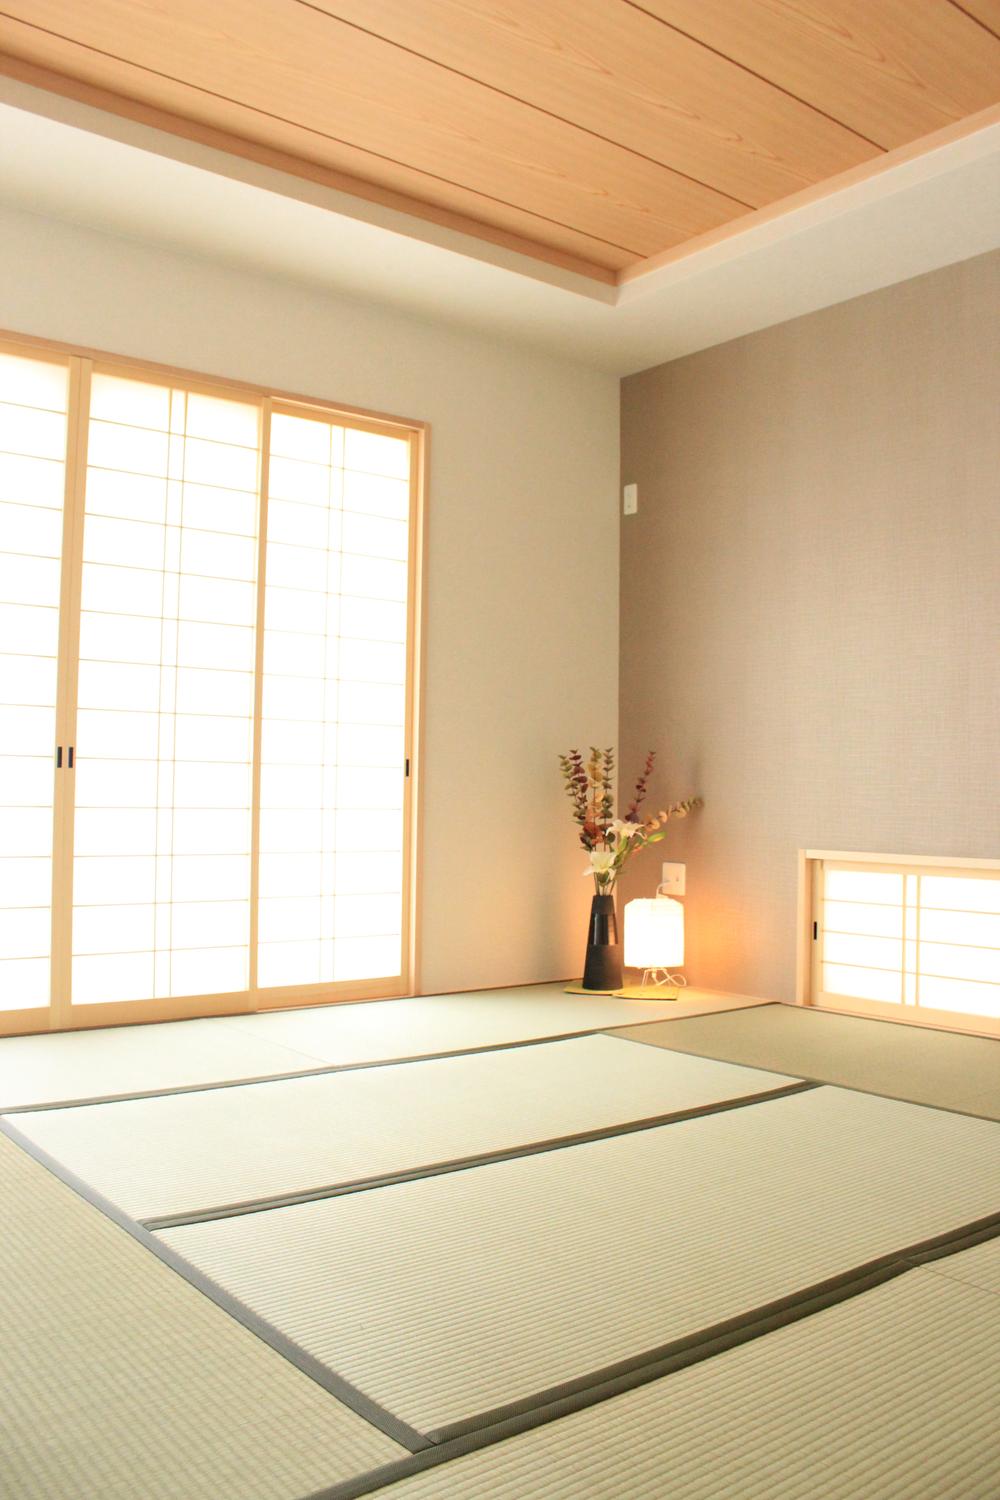 Other introspection. It settles with nature feeling, Space ... Japanese-style room of relaxation